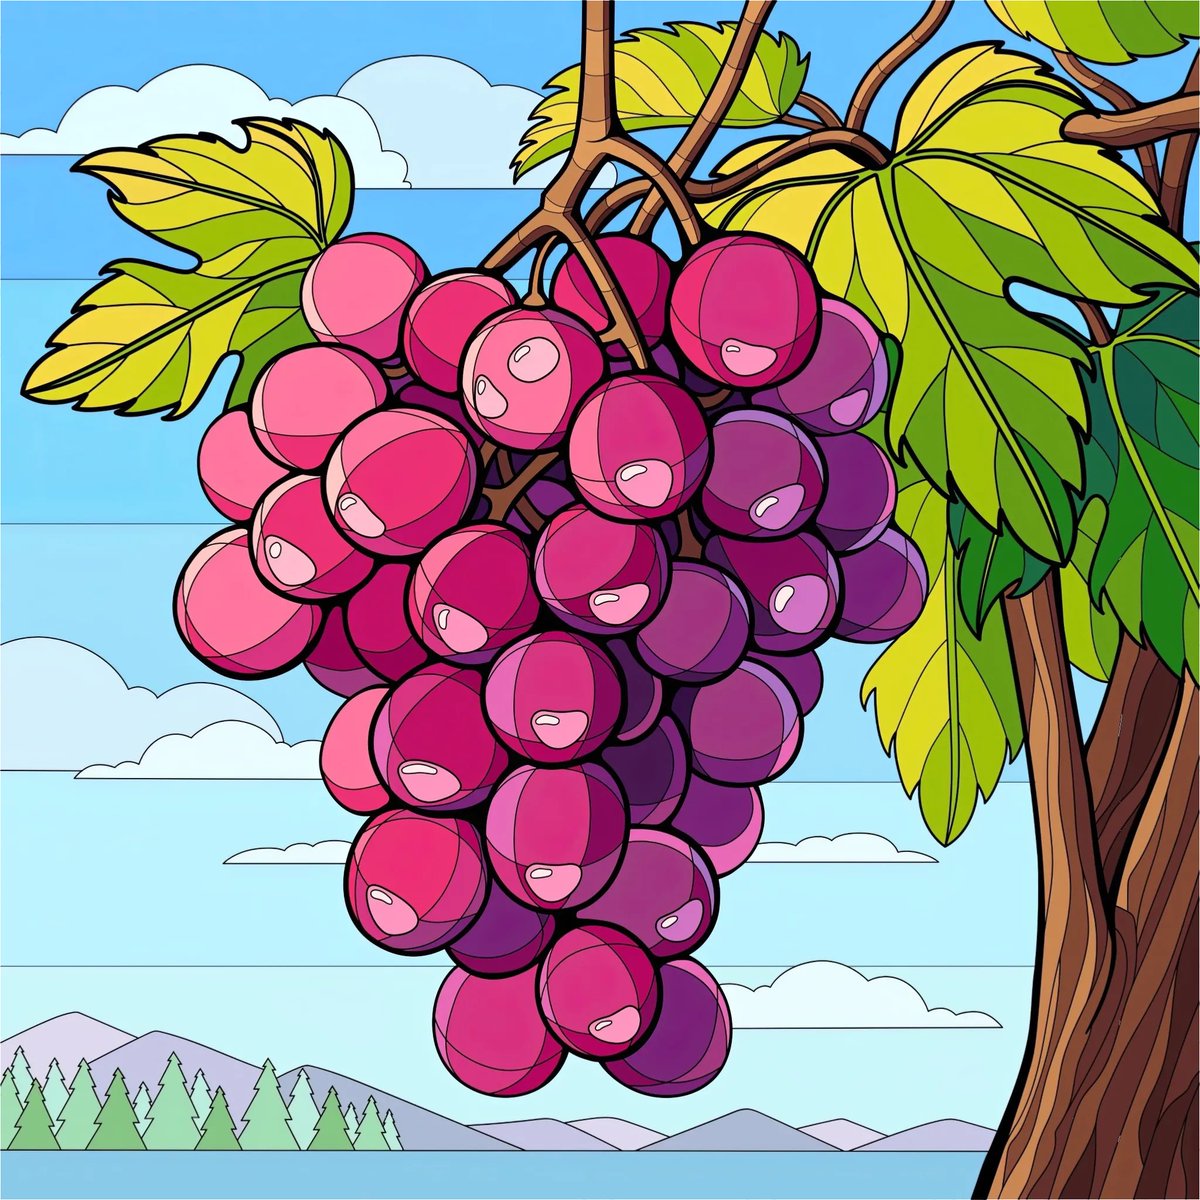 Vineland the City of Wine grapes. My town.💚💜🤎💙💚💜🤎💙💚💜💚